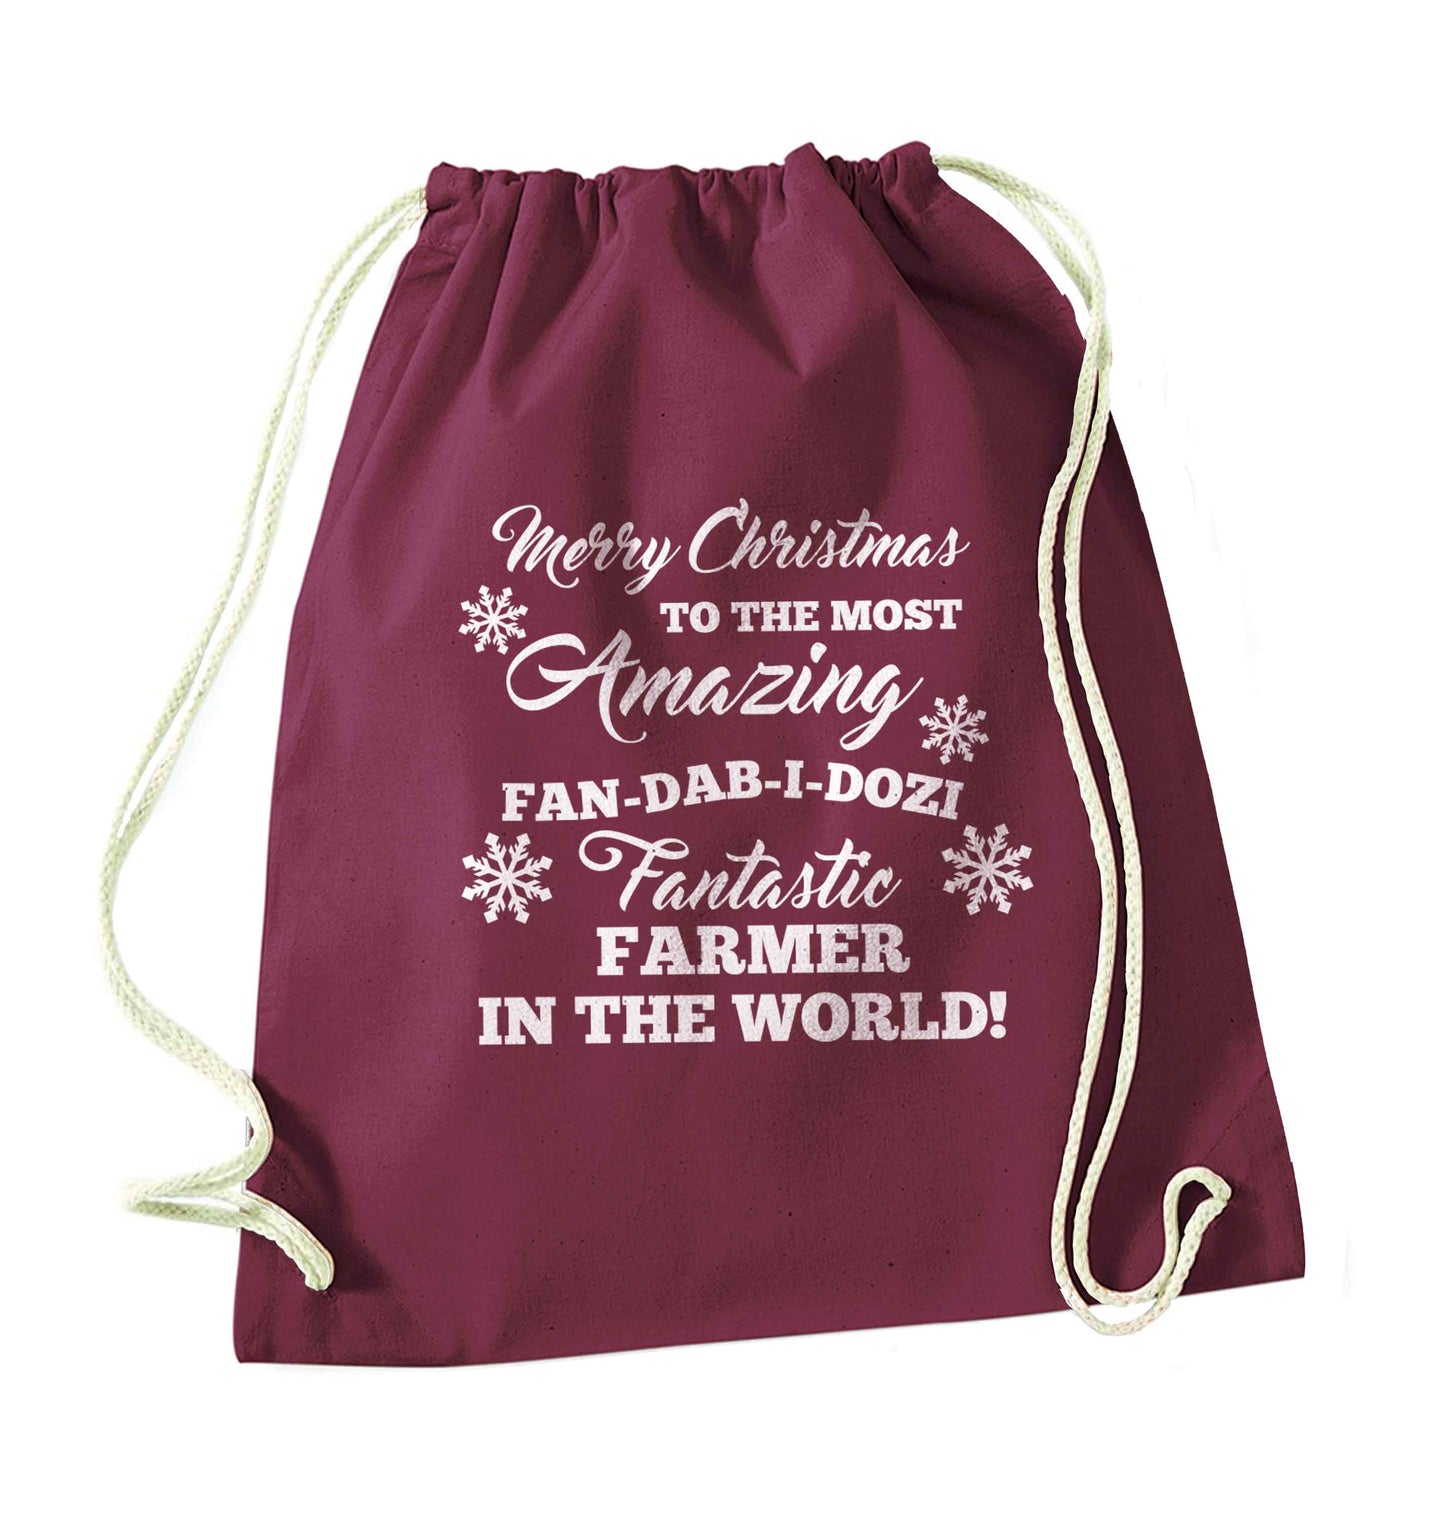 Merry Christmas to the most amazing farmer in the world! maroon drawstring bag